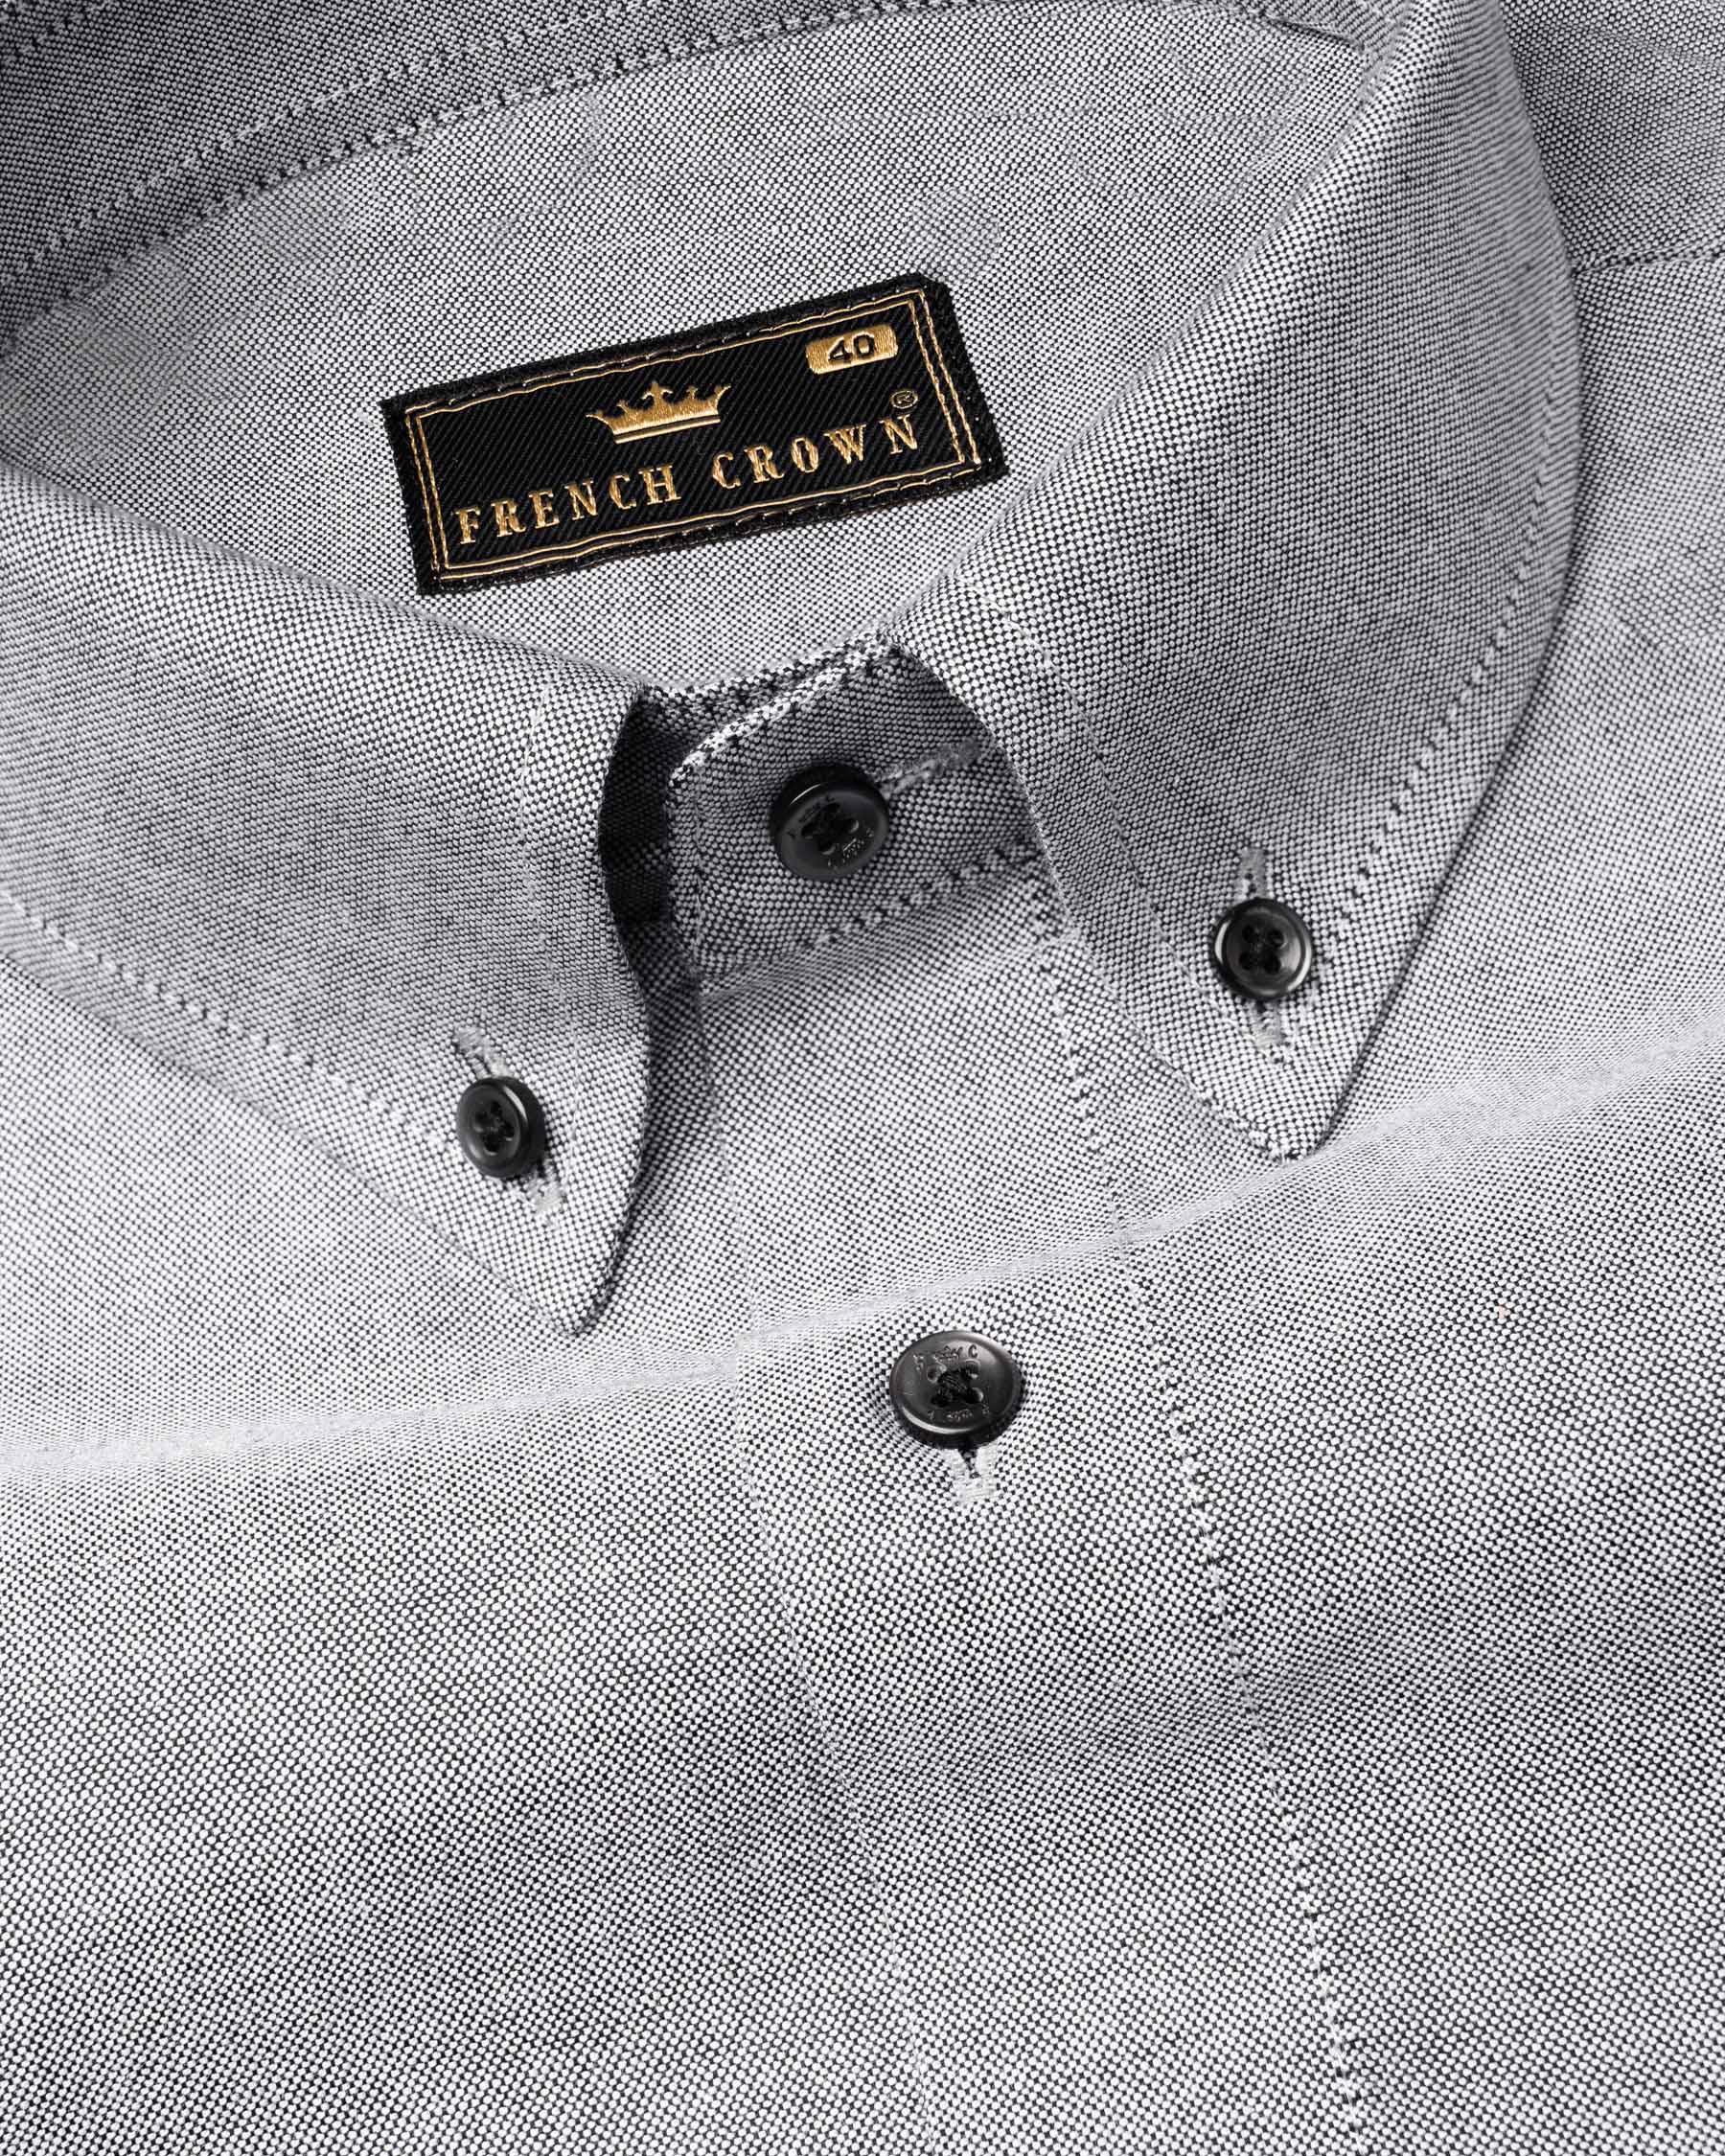 Pumice Gray with Pink Pocket Royal Oxford Shirt 6722-BD-BLK-38,6722-BD-BLK-38,6722-BD-BLK-39,6722-BD-BLK-39,6722-BD-BLK-40,6722-BD-BLK-40,6722-BD-BLK-42,6722-BD-BLK-42,6722-BD-BLK-44,6722-BD-BLK-44,6722-BD-BLK-46,6722-BD-BLK-46,6722-BD-BLK-48,6722-BD-BLK-48,6722-BD-BLK-50,6722-BD-BLK-50,6722-BD-BLK-52,6722-BD-BLK-52